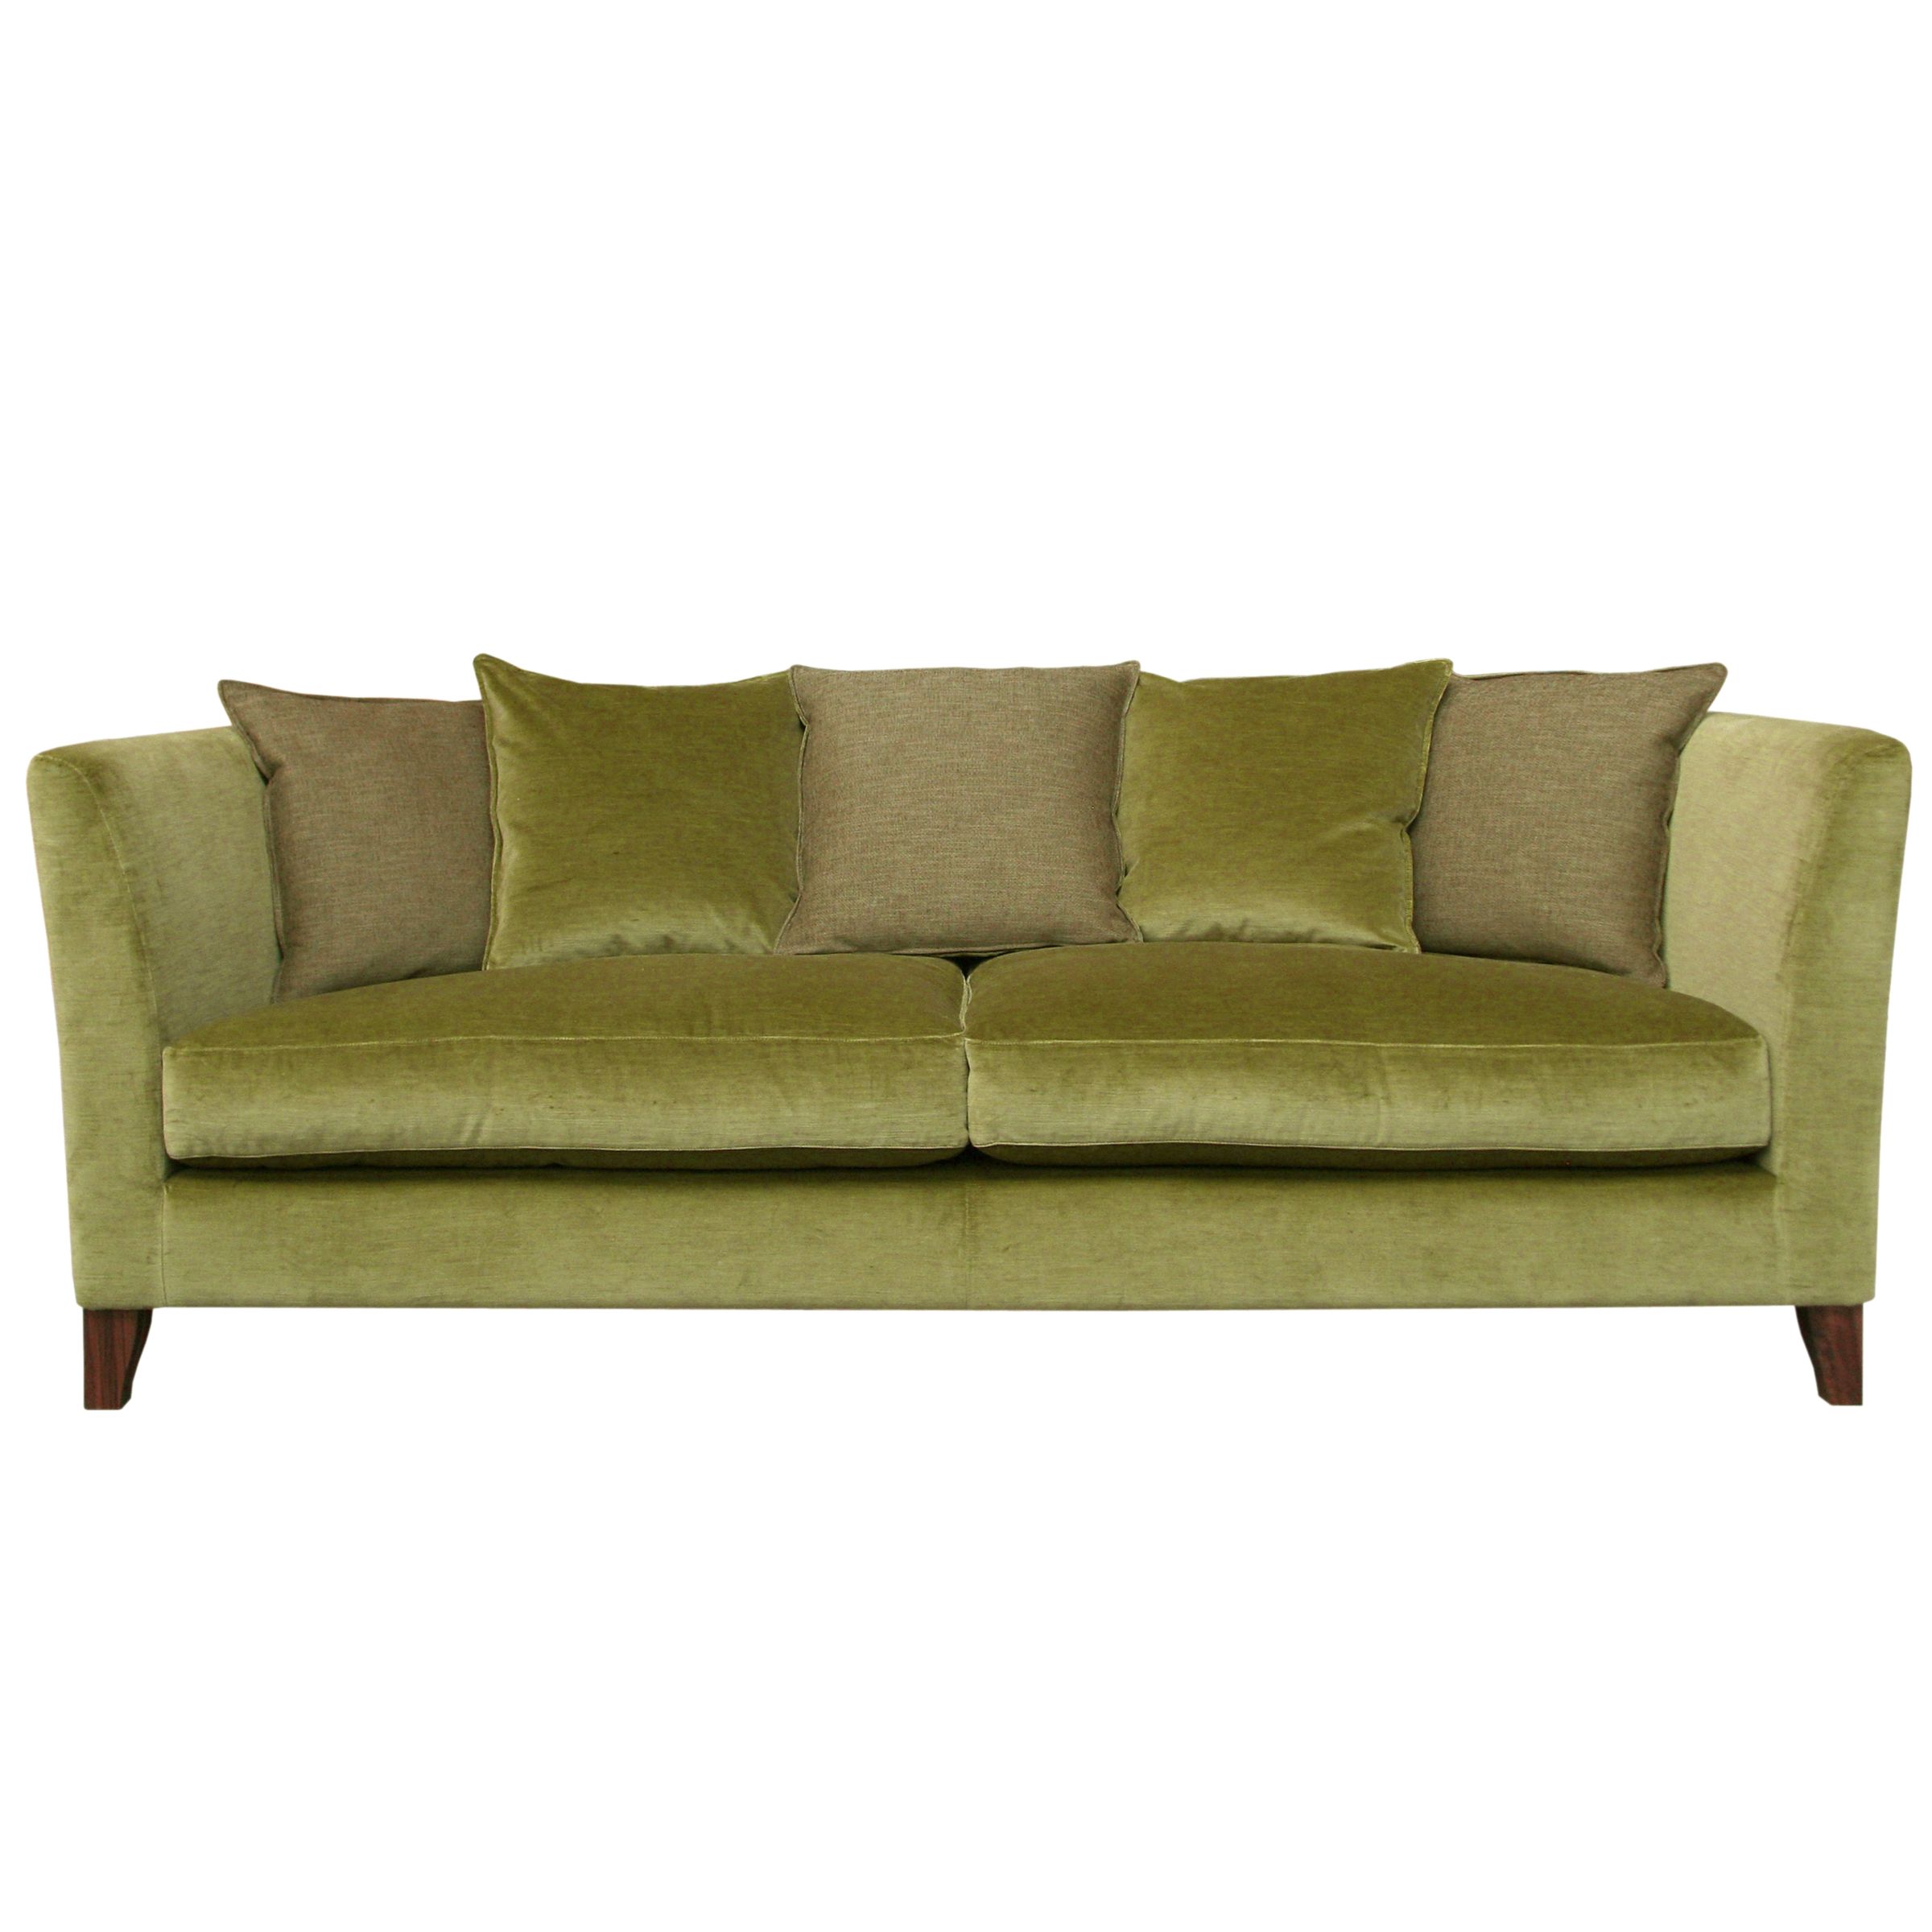 Nick Munro Collection Scatter Back Grand Sofa,